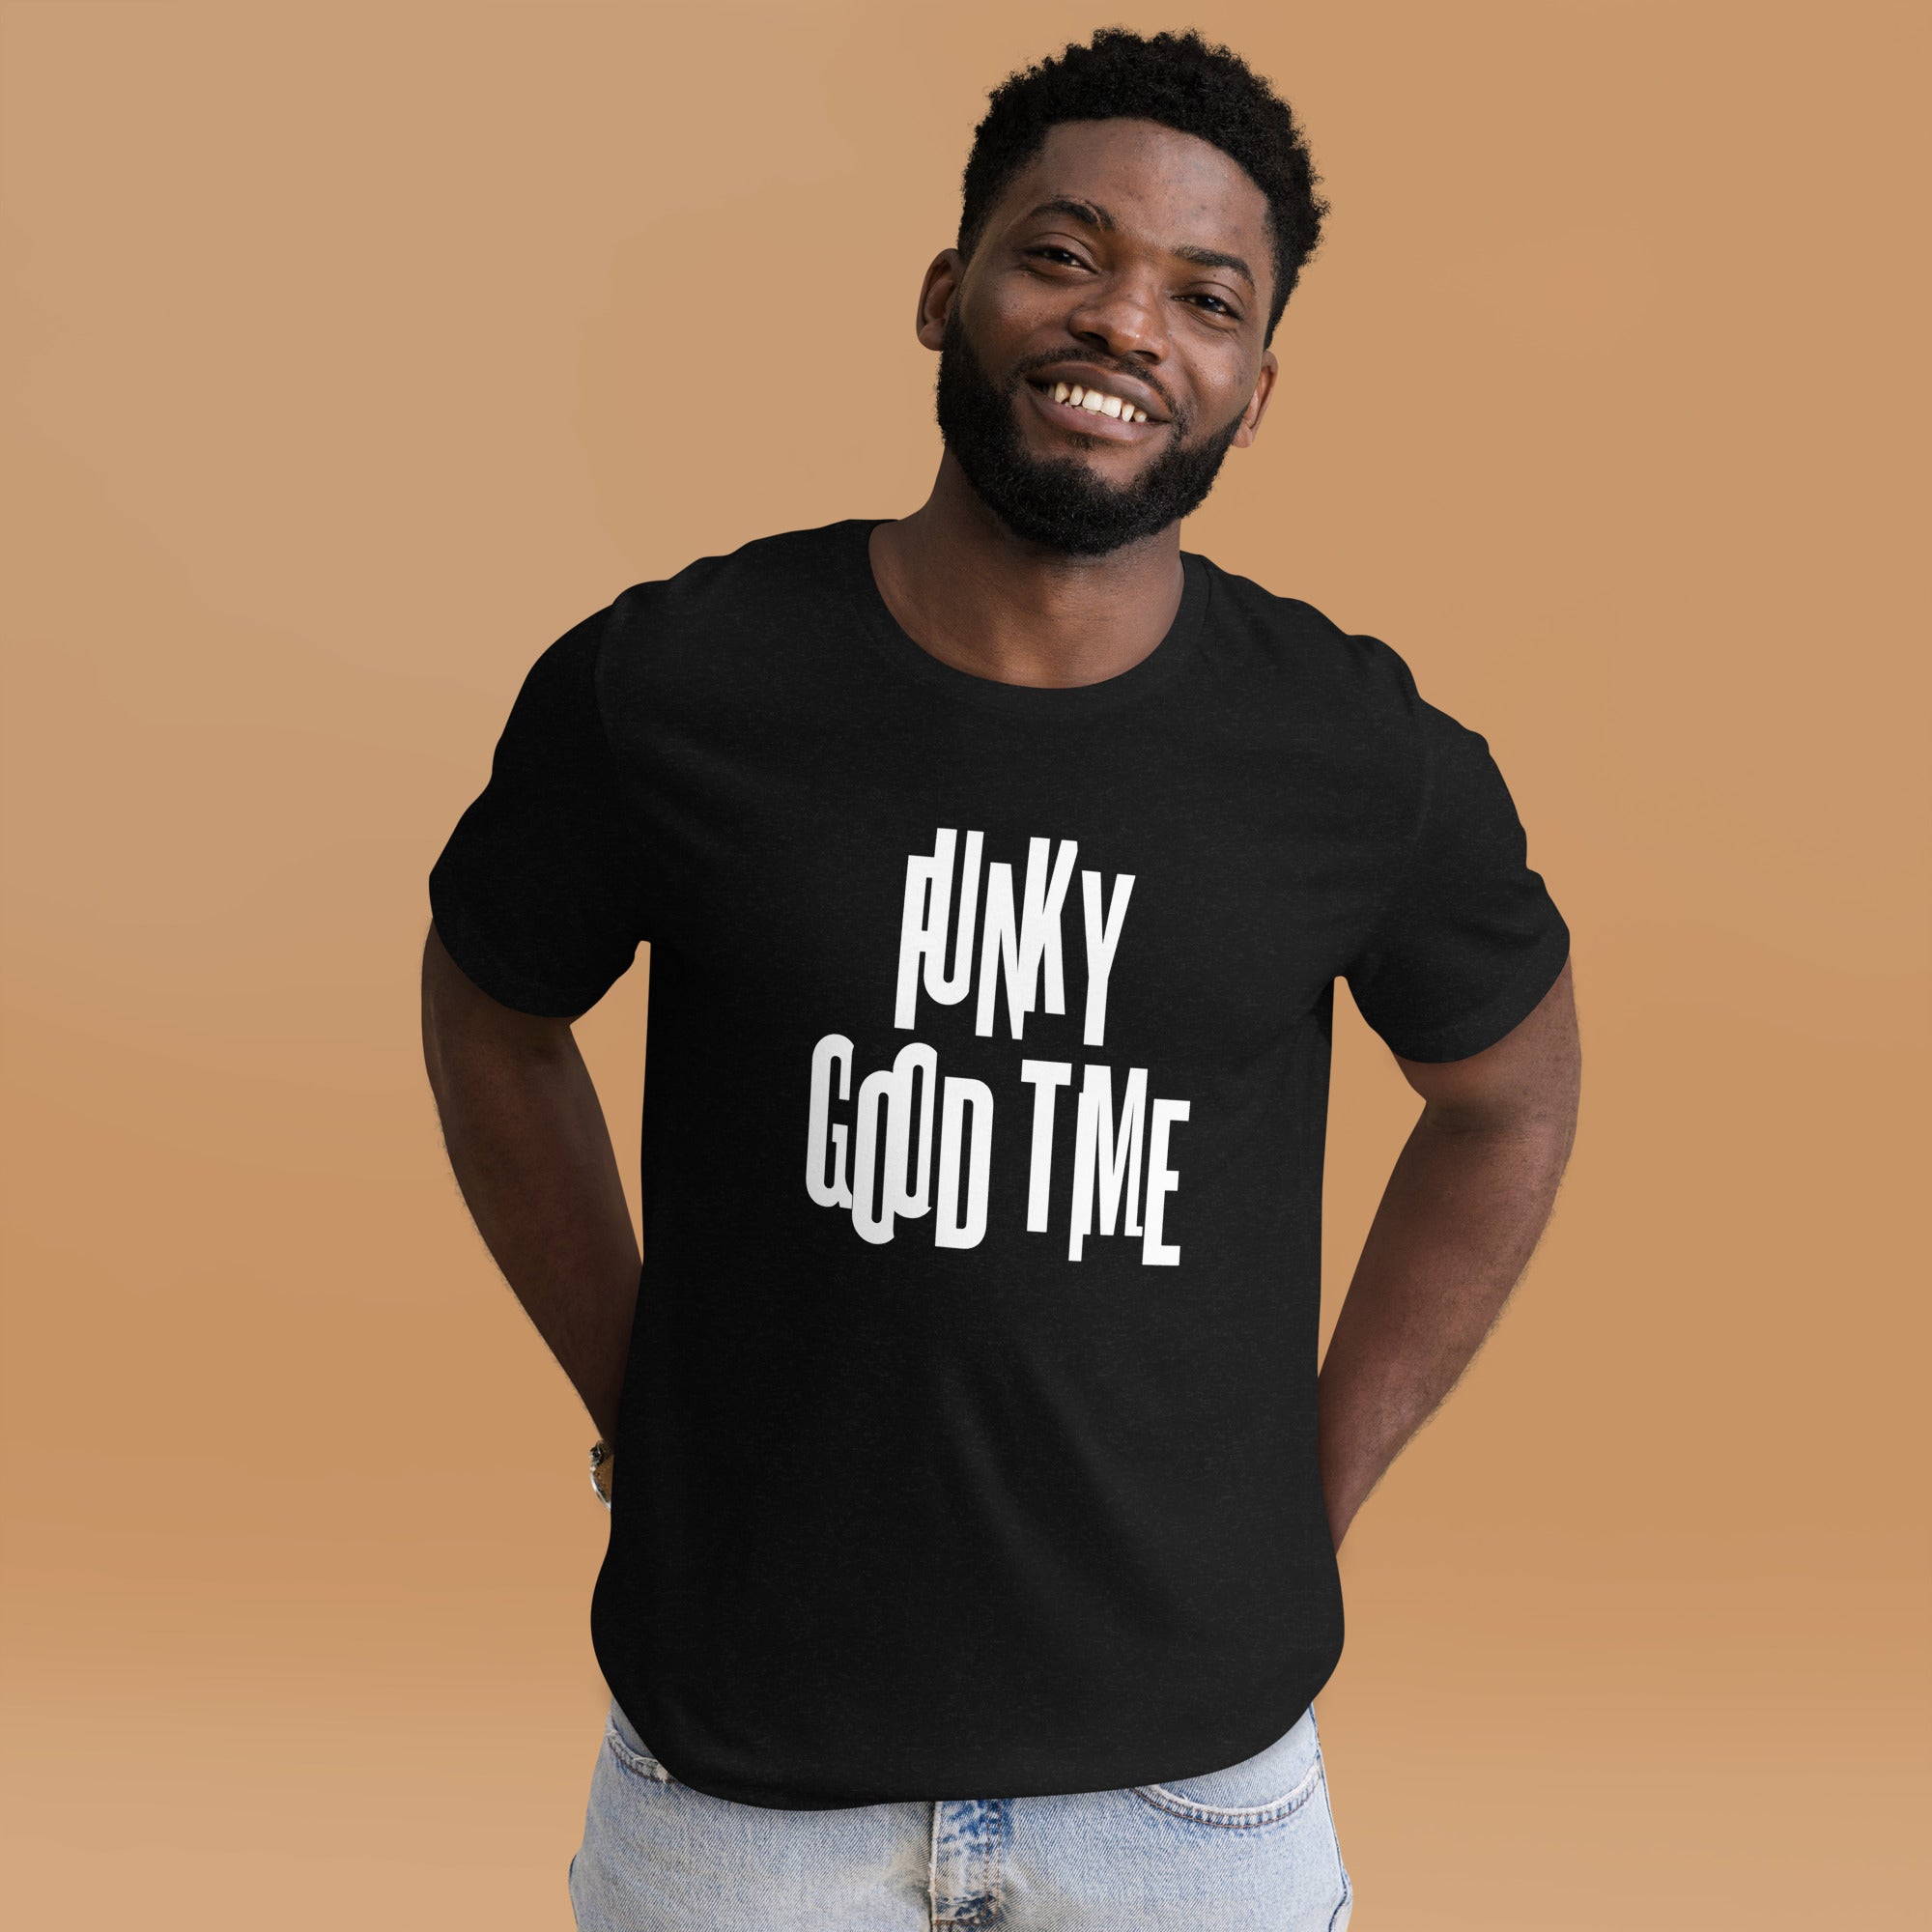 FUNKY GOOD TIME t-shirt